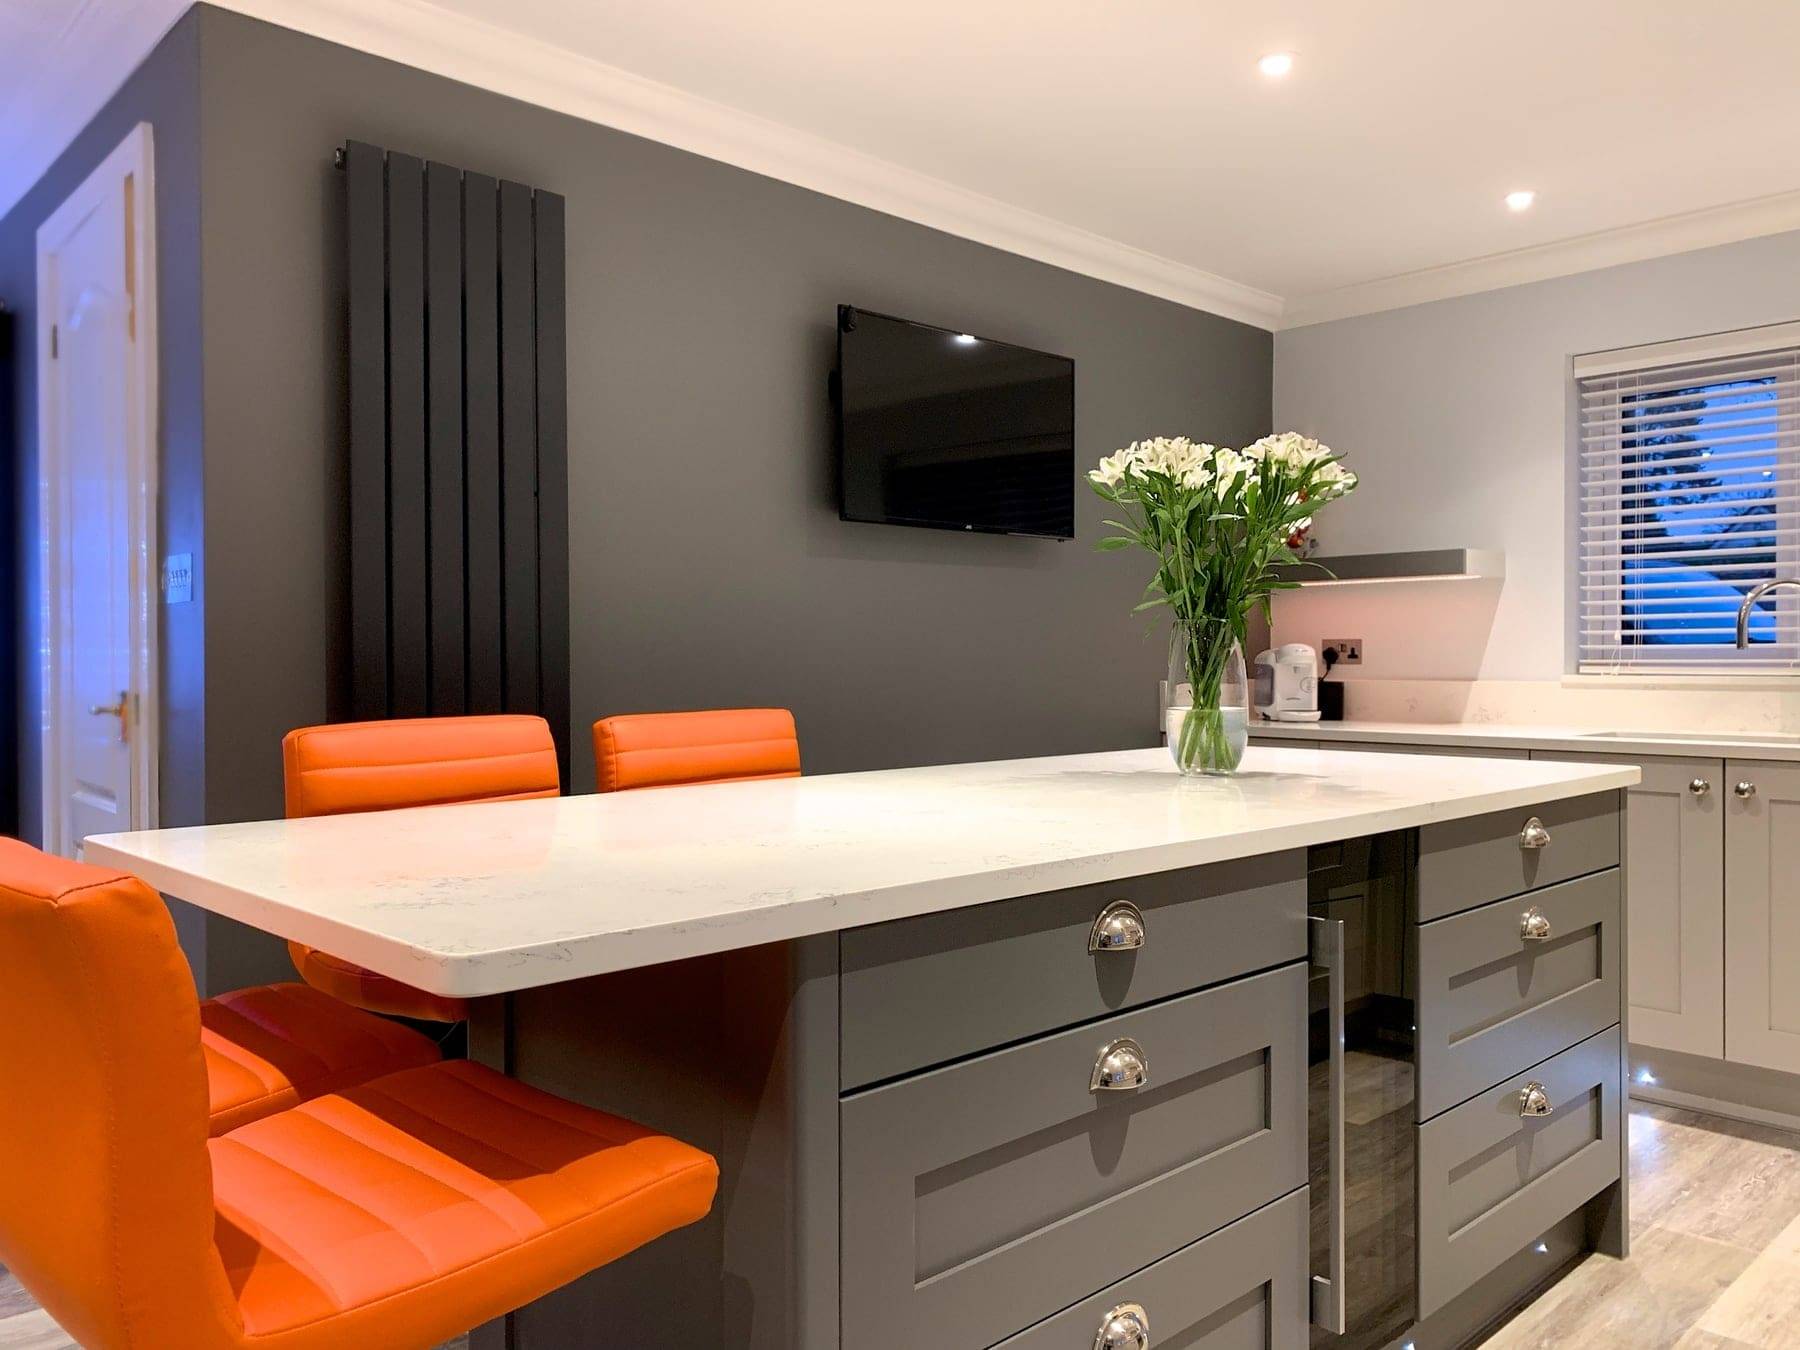 Ud2200 Uttley Fb 1372 | Utopia Kitchens, Crowthorne